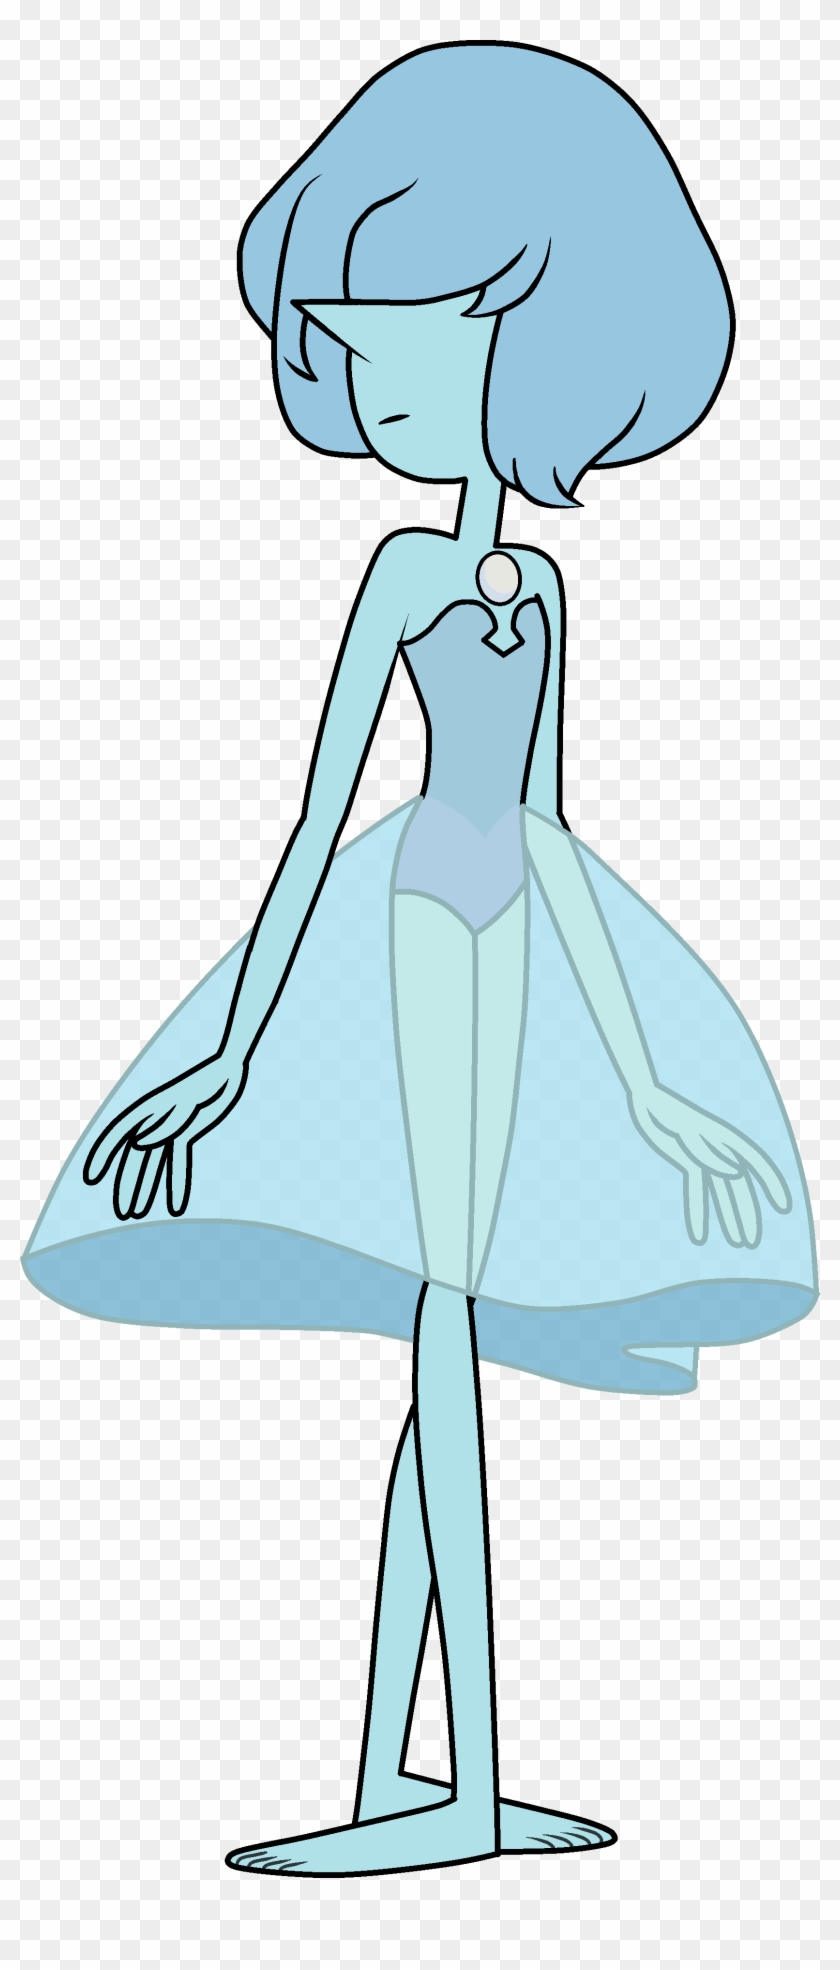 Welcome To Reddit, - Steven Universe Blue Pearl Clipart #613031